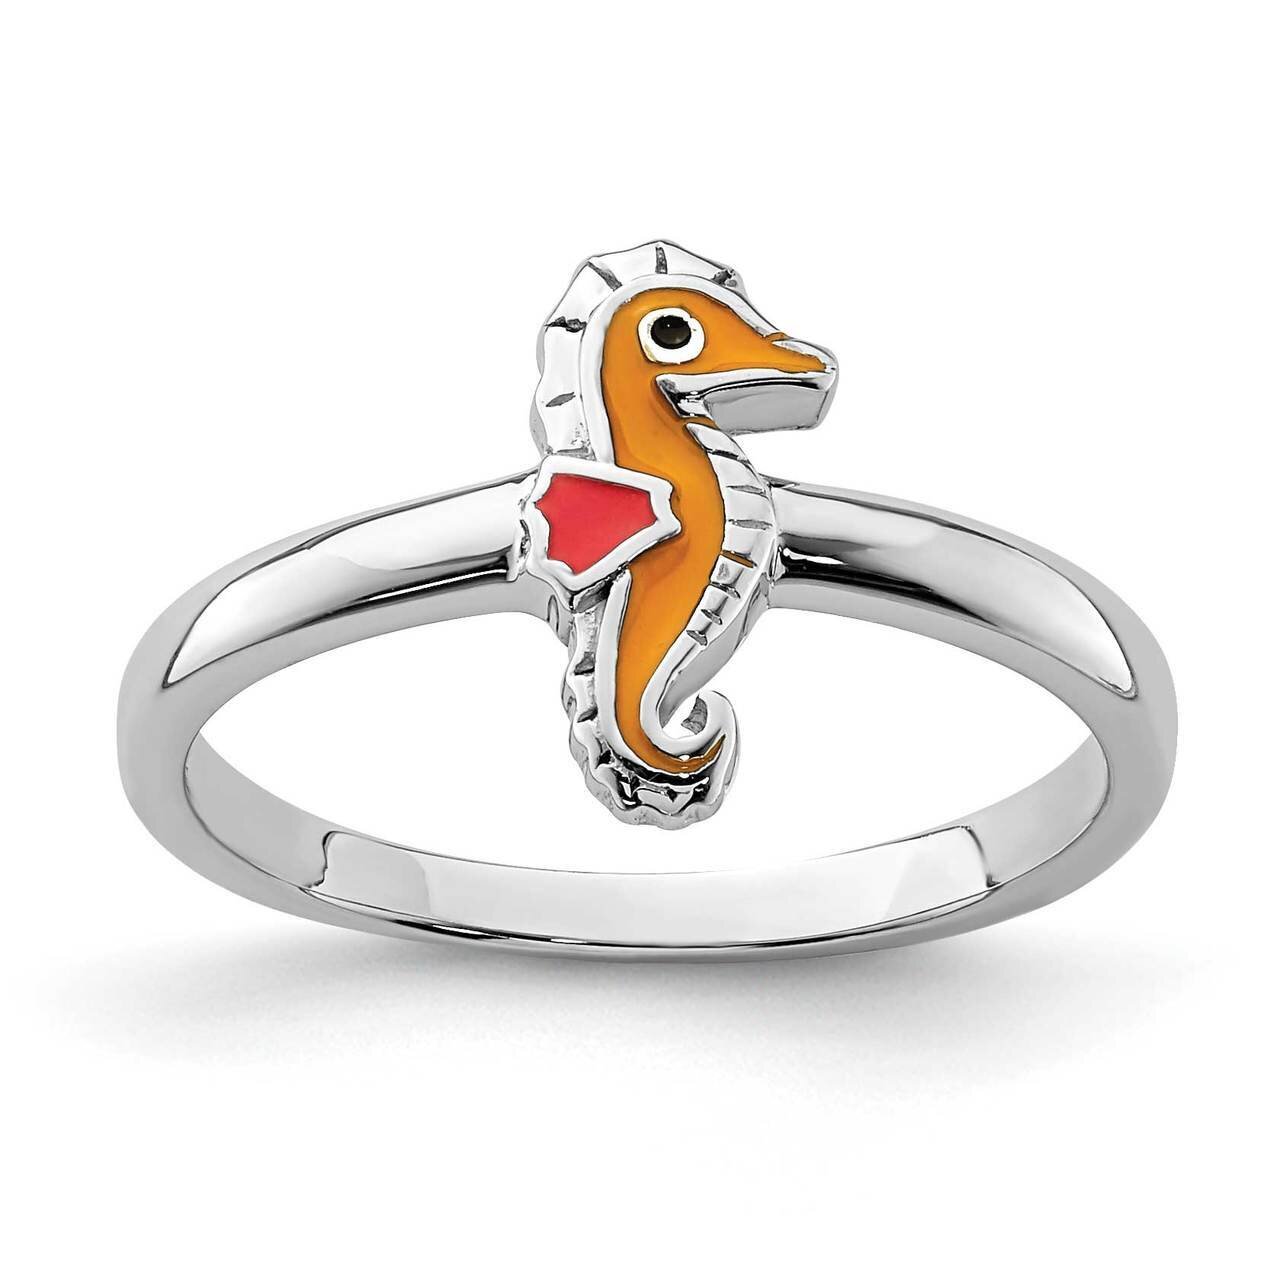 Childs Enameled Seahorse Ring Sterling Silver Rhodium-plated QR6812